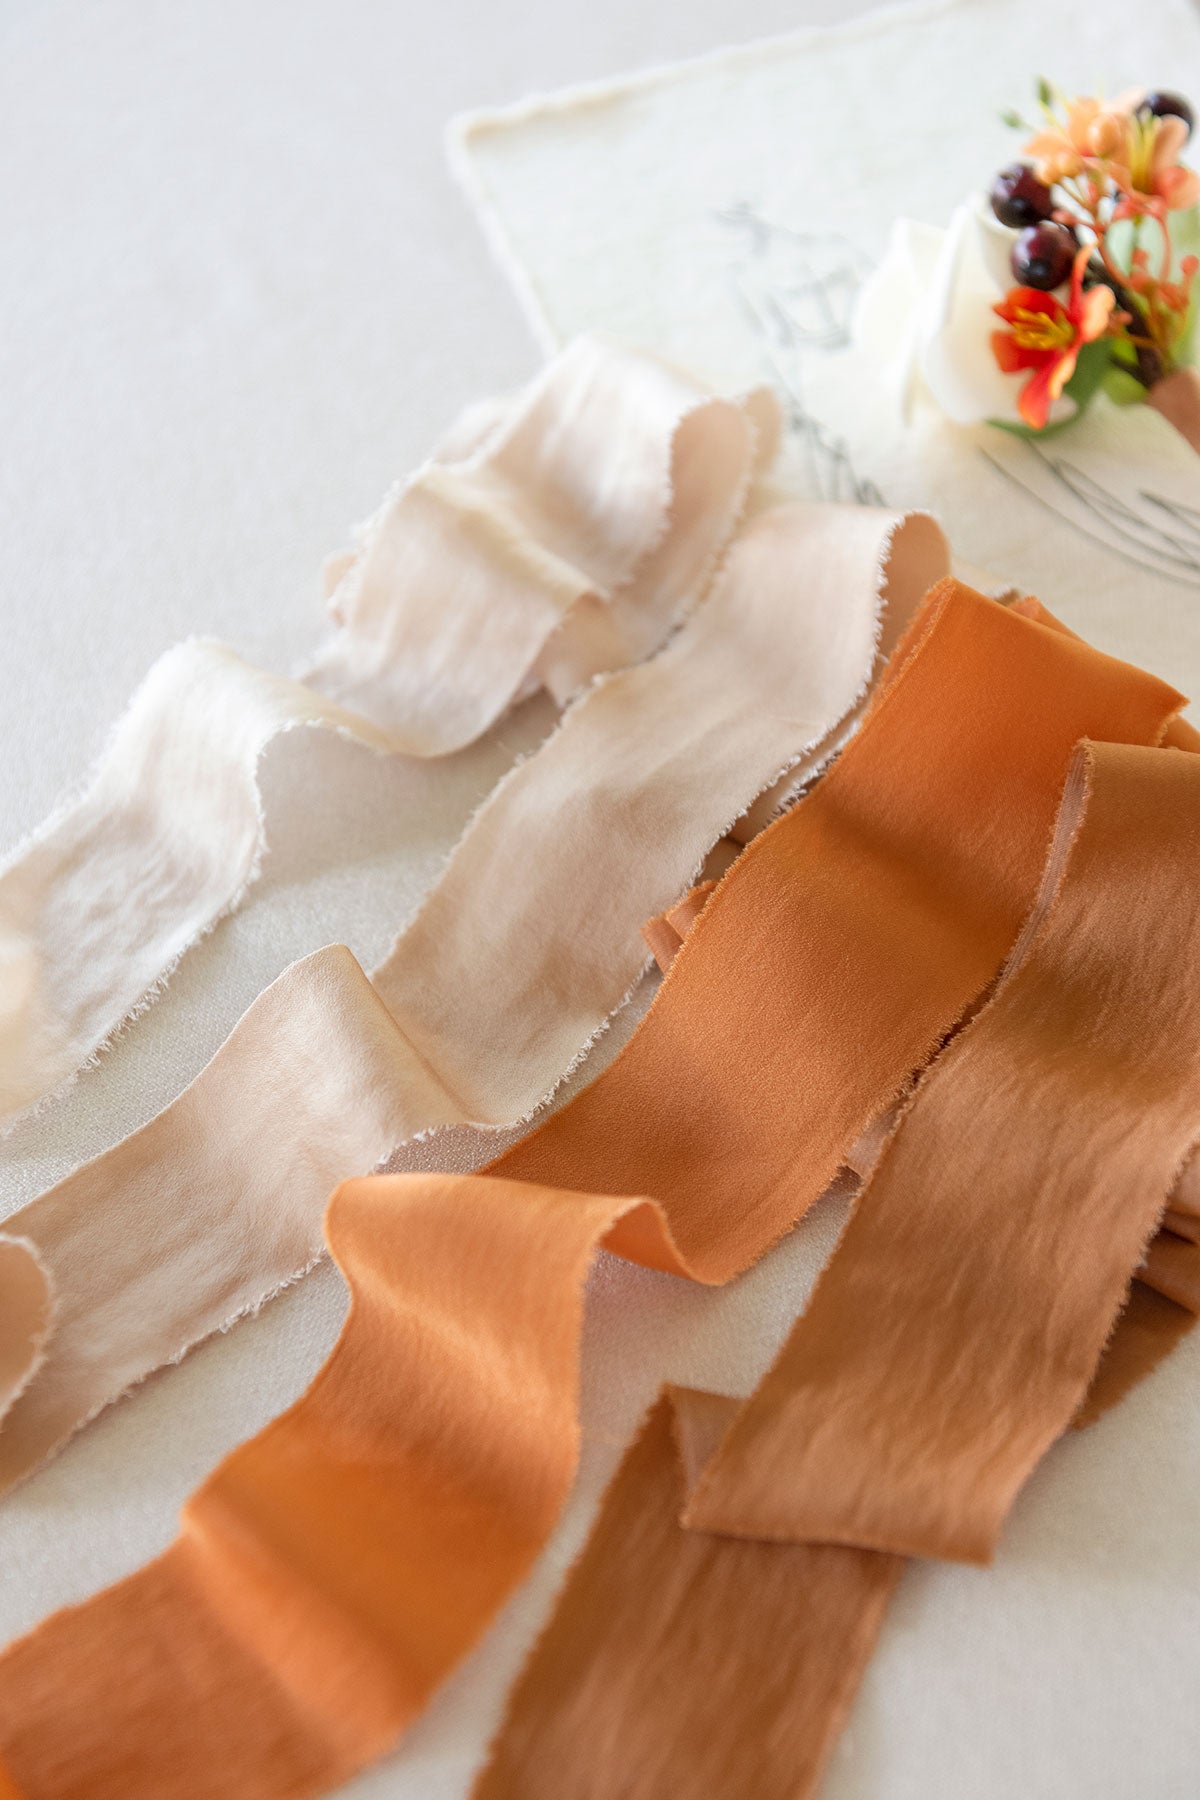 Sheer Frayed Chiffon Ribbons 1.5" w x 4.5ft - Ombre Colors